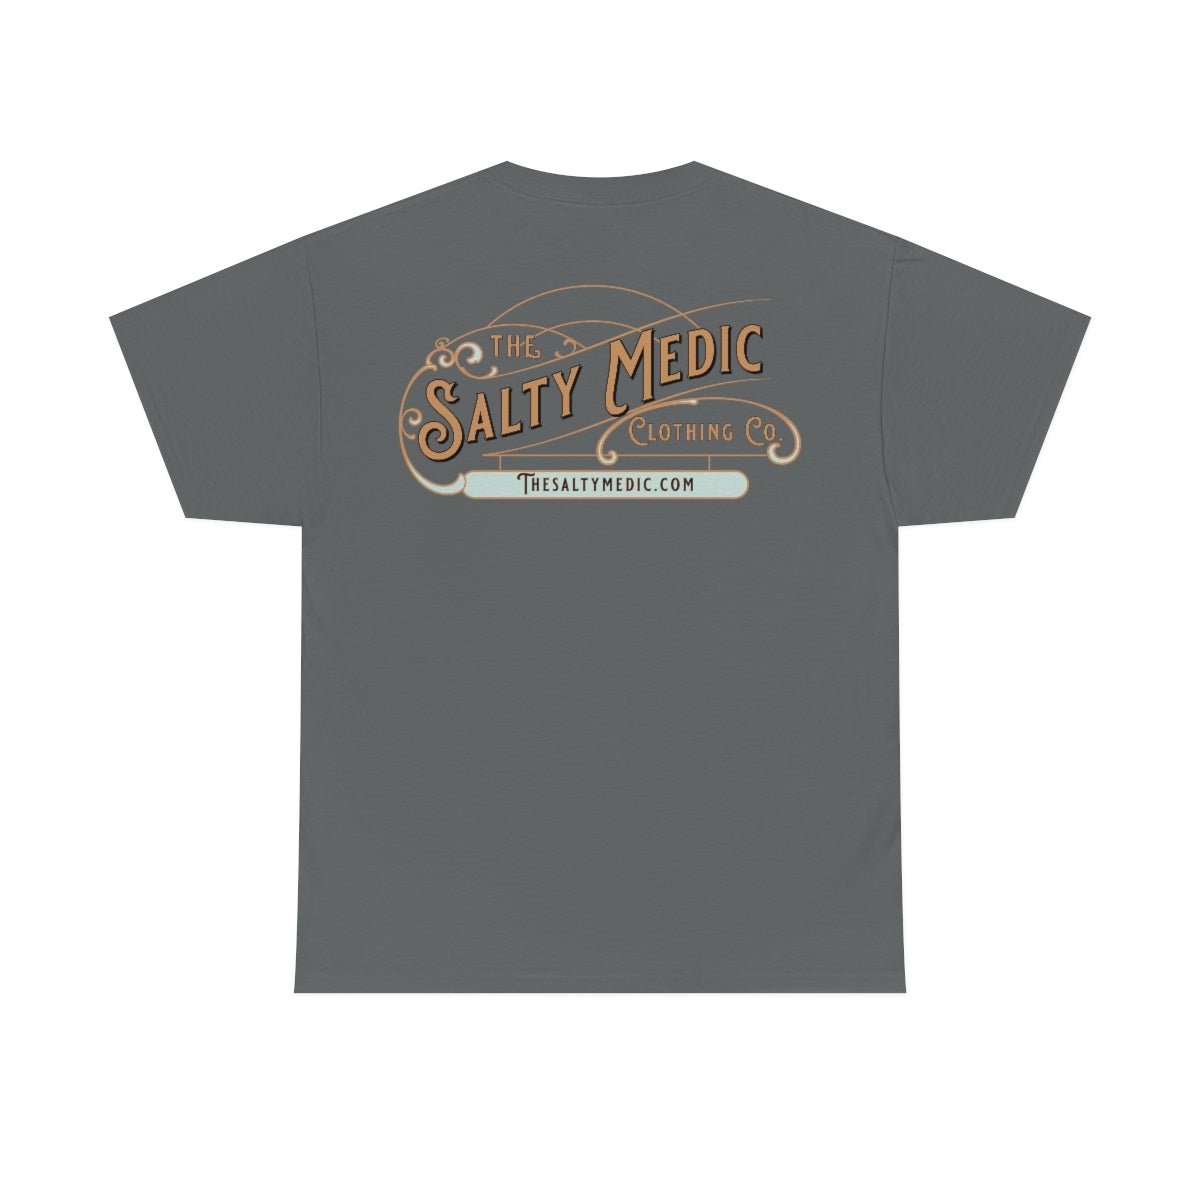 I Narcanned Your Honor Student T-shirt - Salty Medic Clothing Co.